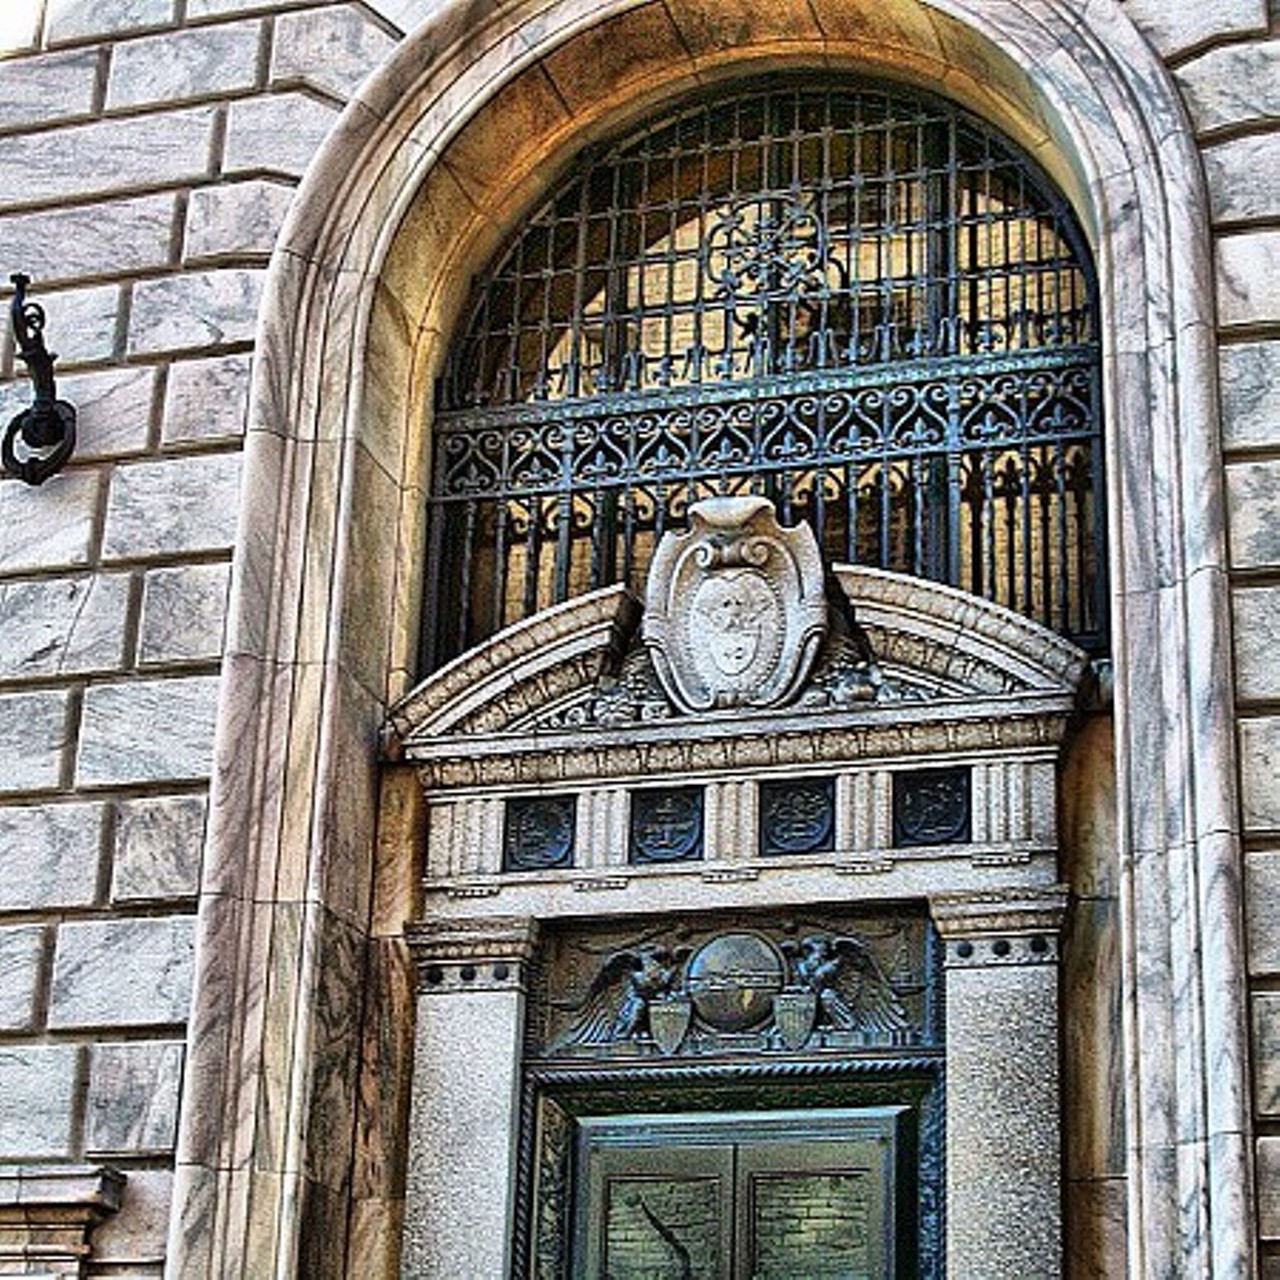 The Federal Reserve Bank Building in downtown Cleveland is said to be haunted by the ghost of a woman named Matilda. She is reportedly dressed as a flapper, and she killed herself in 1929 when the stock market crashed and she lost everything. She apparently stalks employees throughout the bank. Perhaps she was trying to warn them.